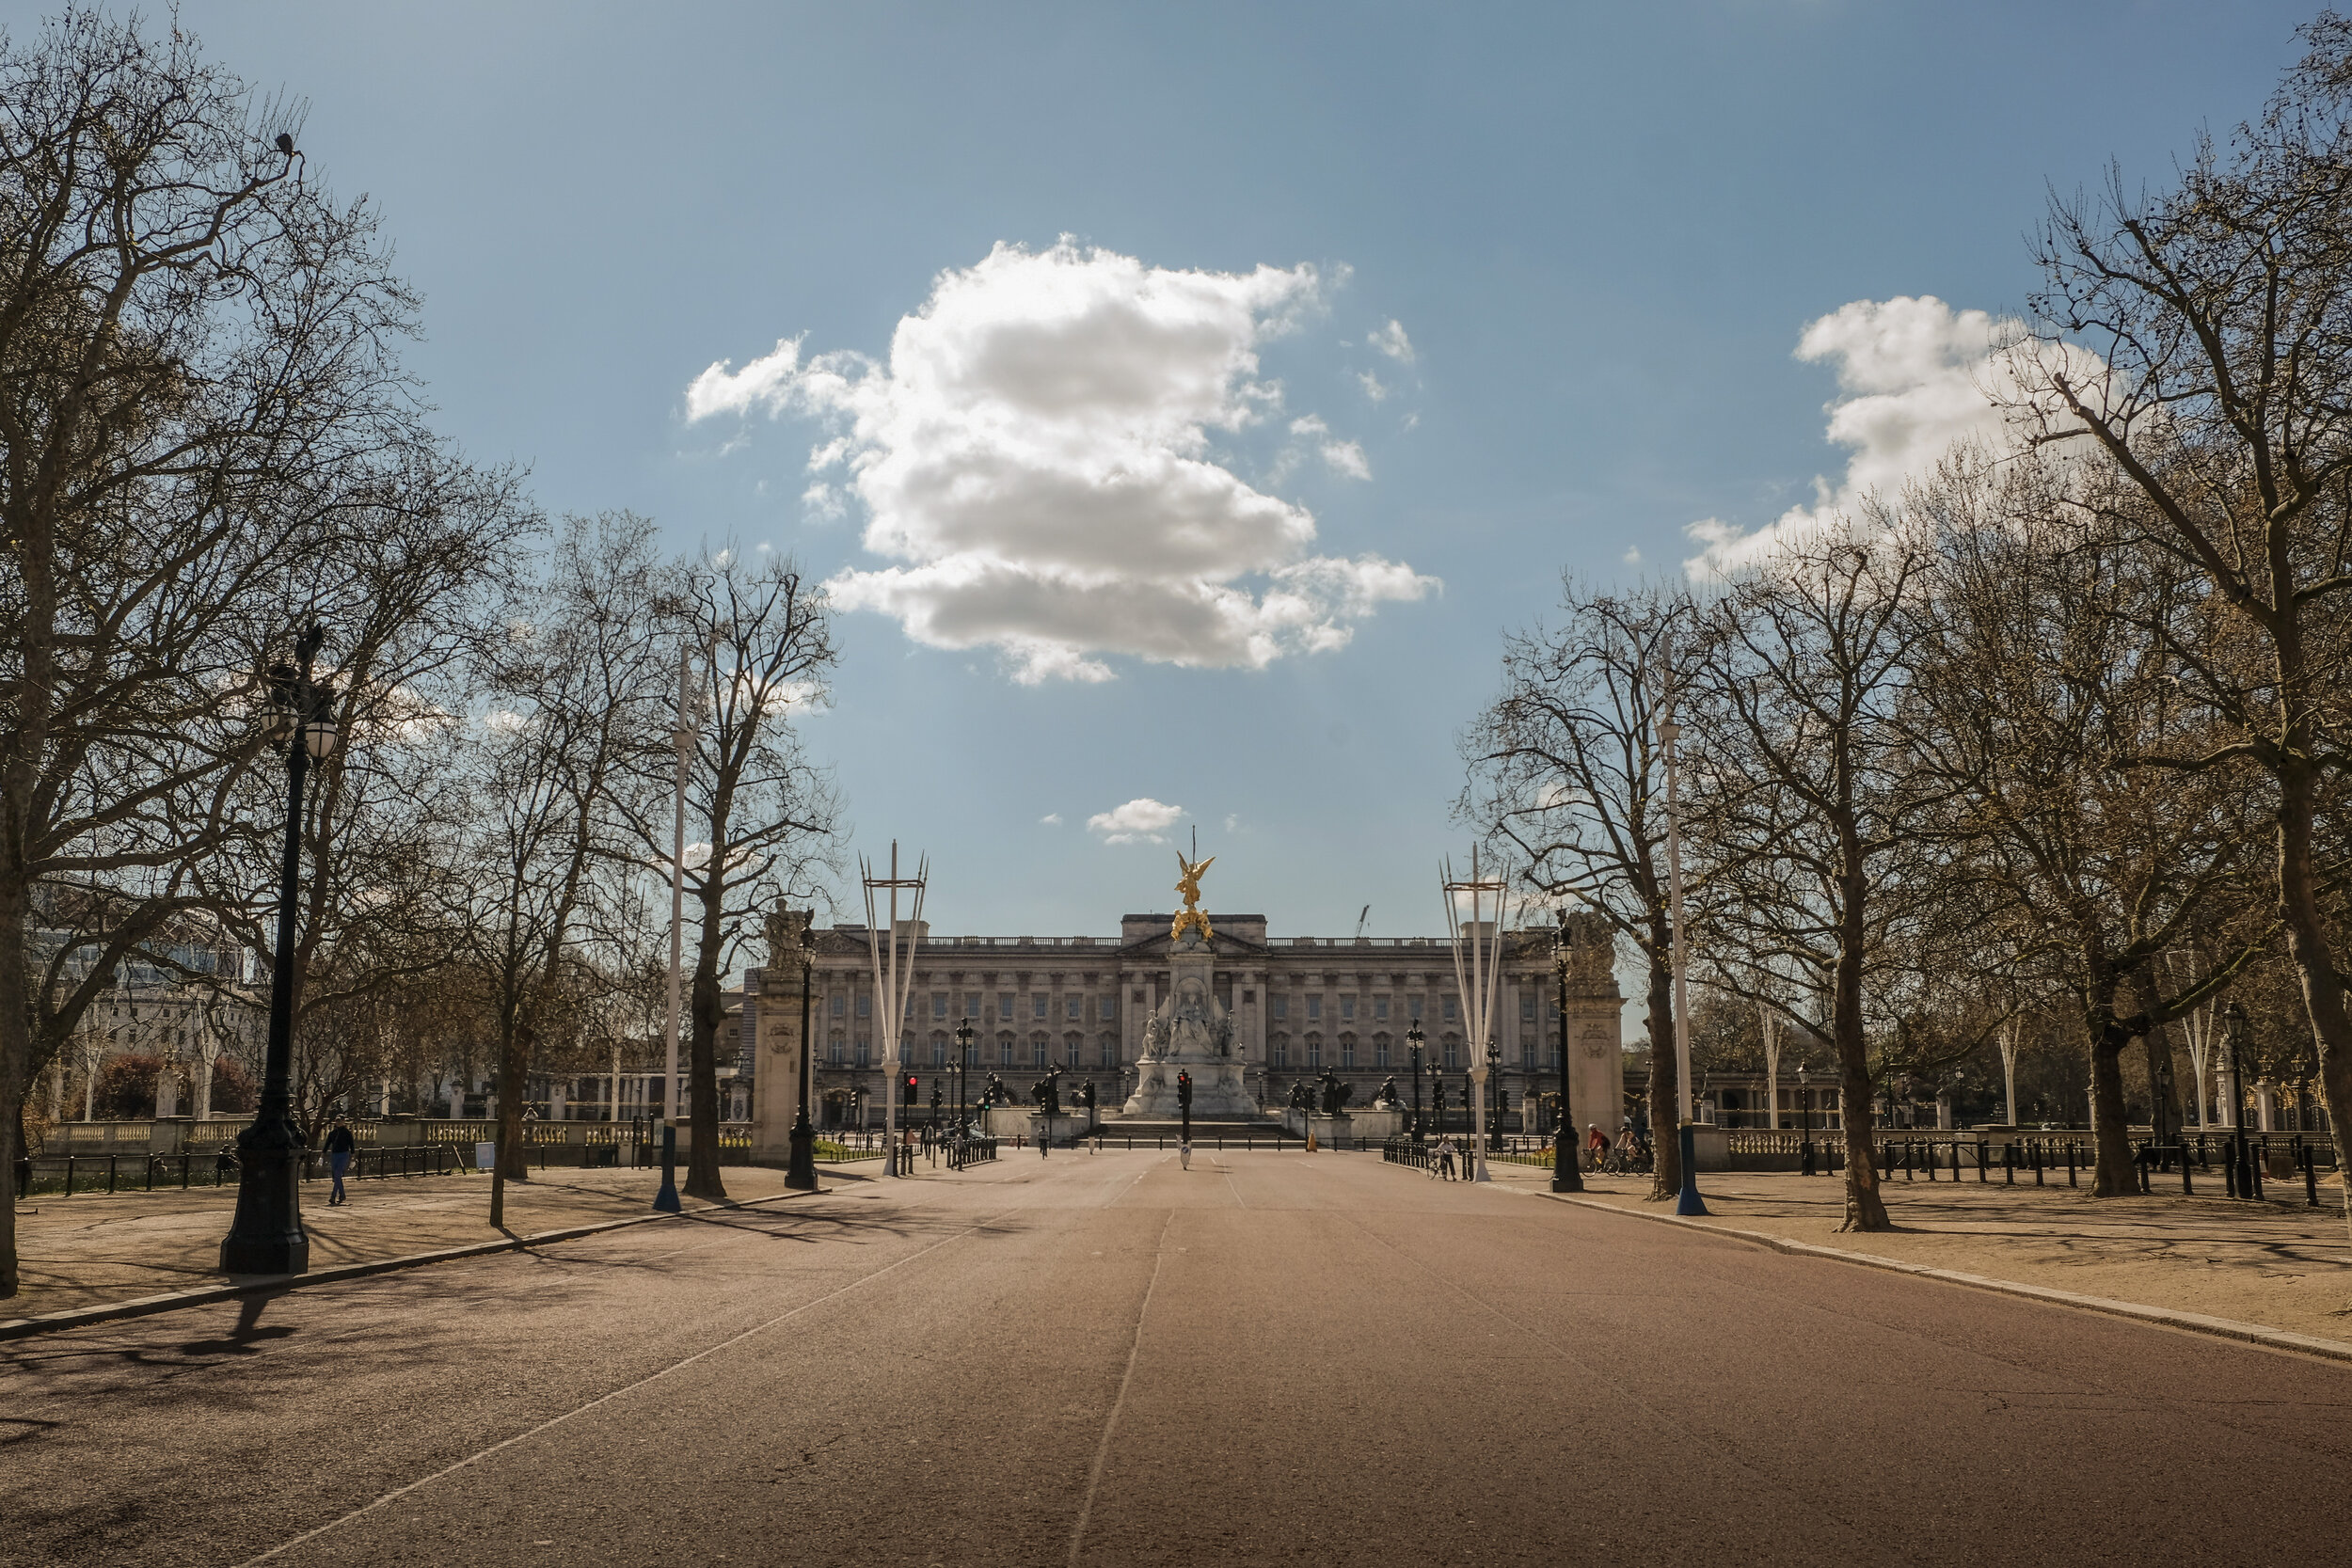 View of Buckingham Palace from Pall Mall